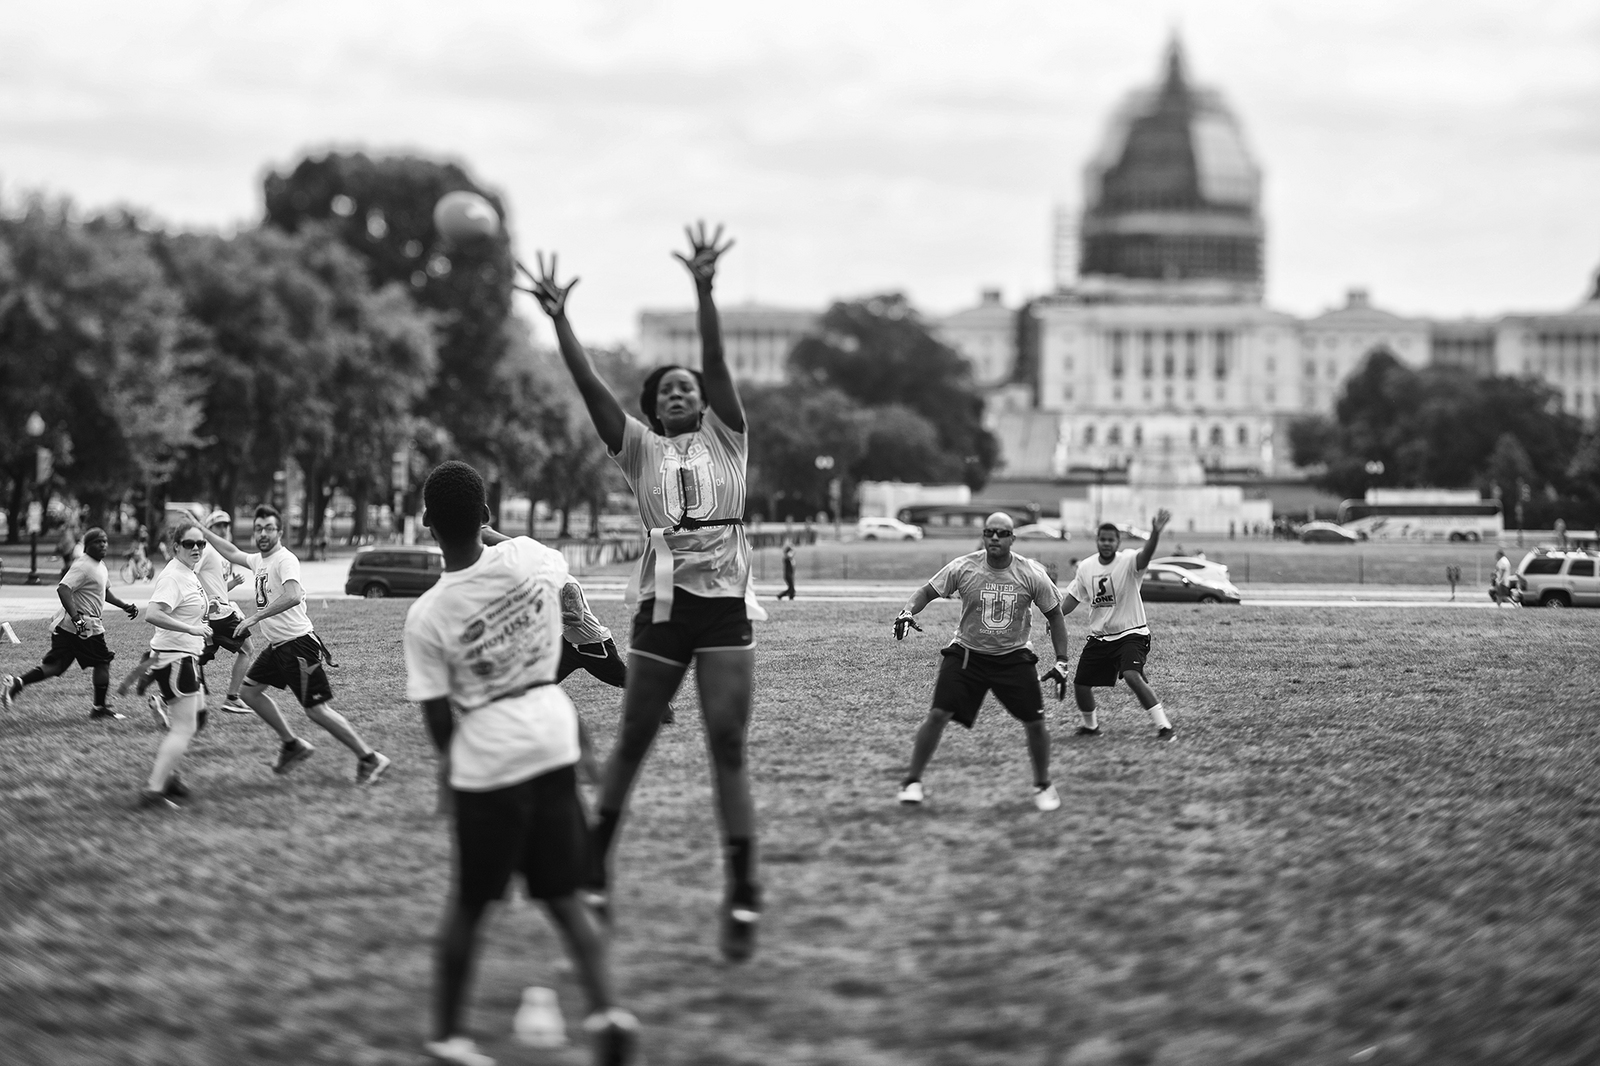 Touch football is a regular on the Mall